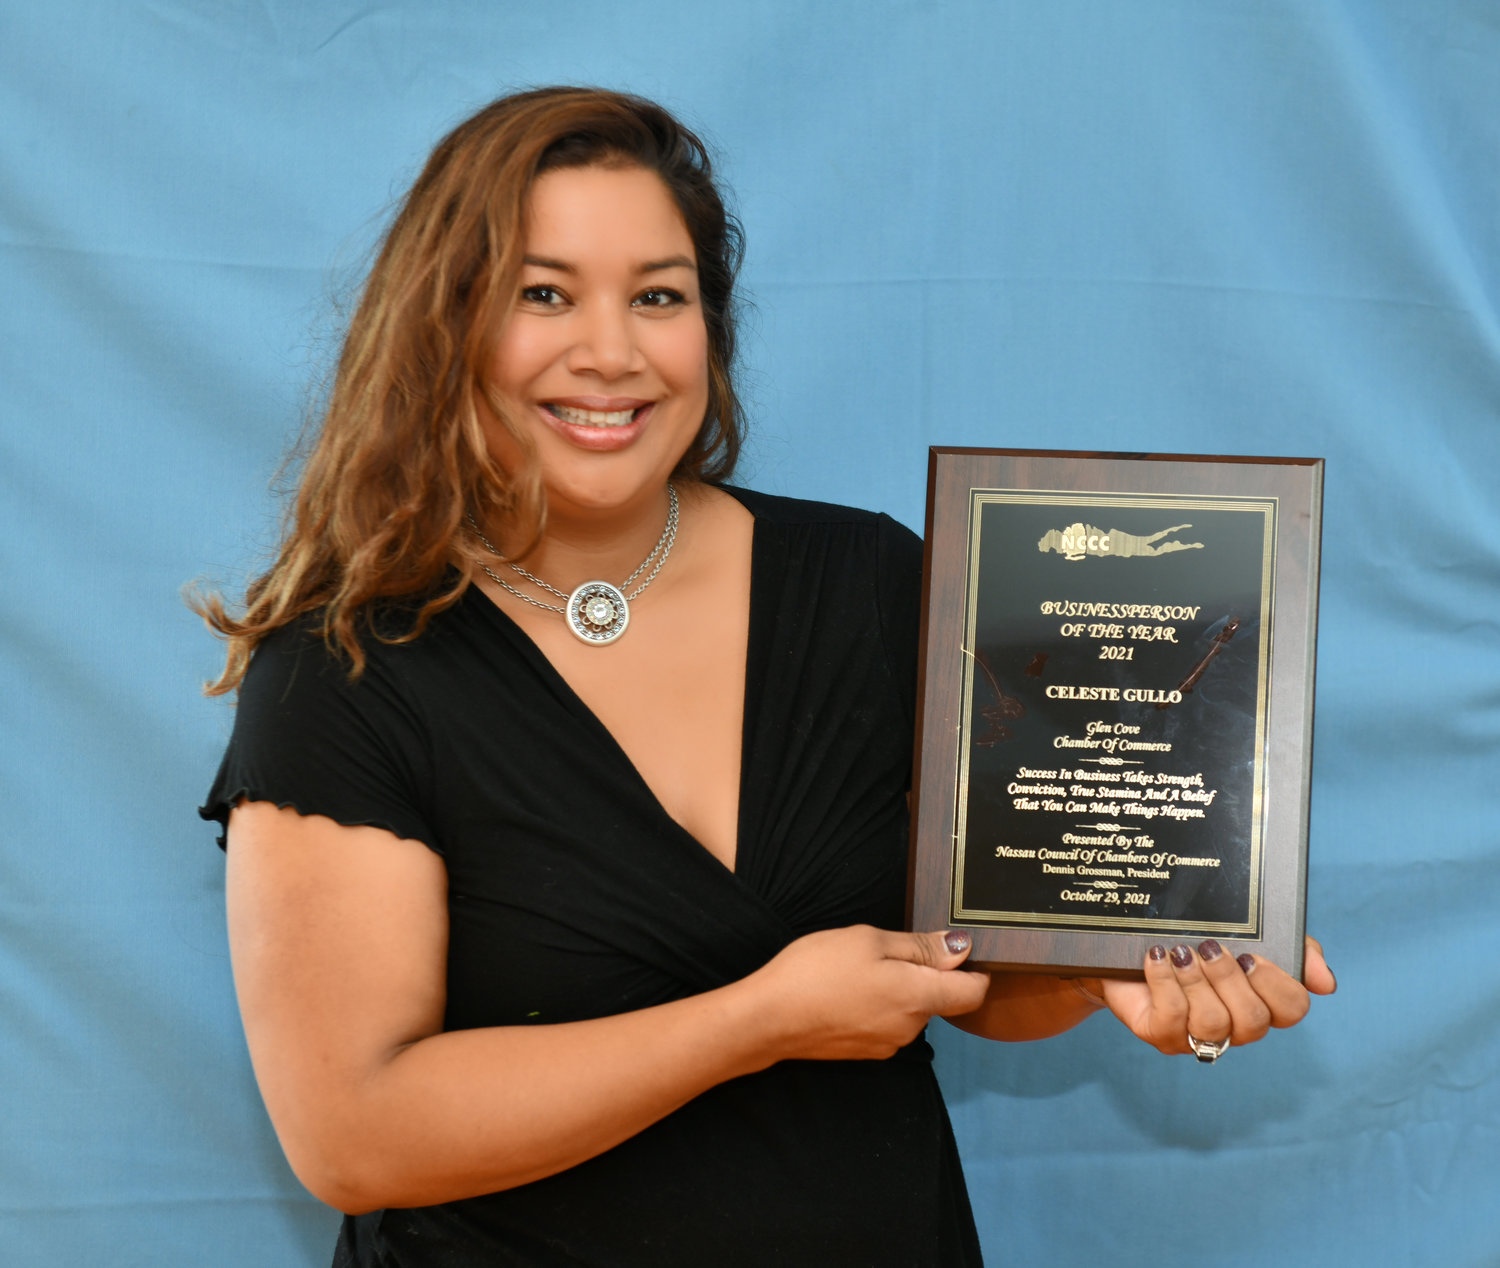 Celeste Gullo, of Glen Cove, owner of an Allstate insurance agency in Glen Head, was named the 2021 Businessperson of the Year by the Glen Cove Chamber of Commerce.